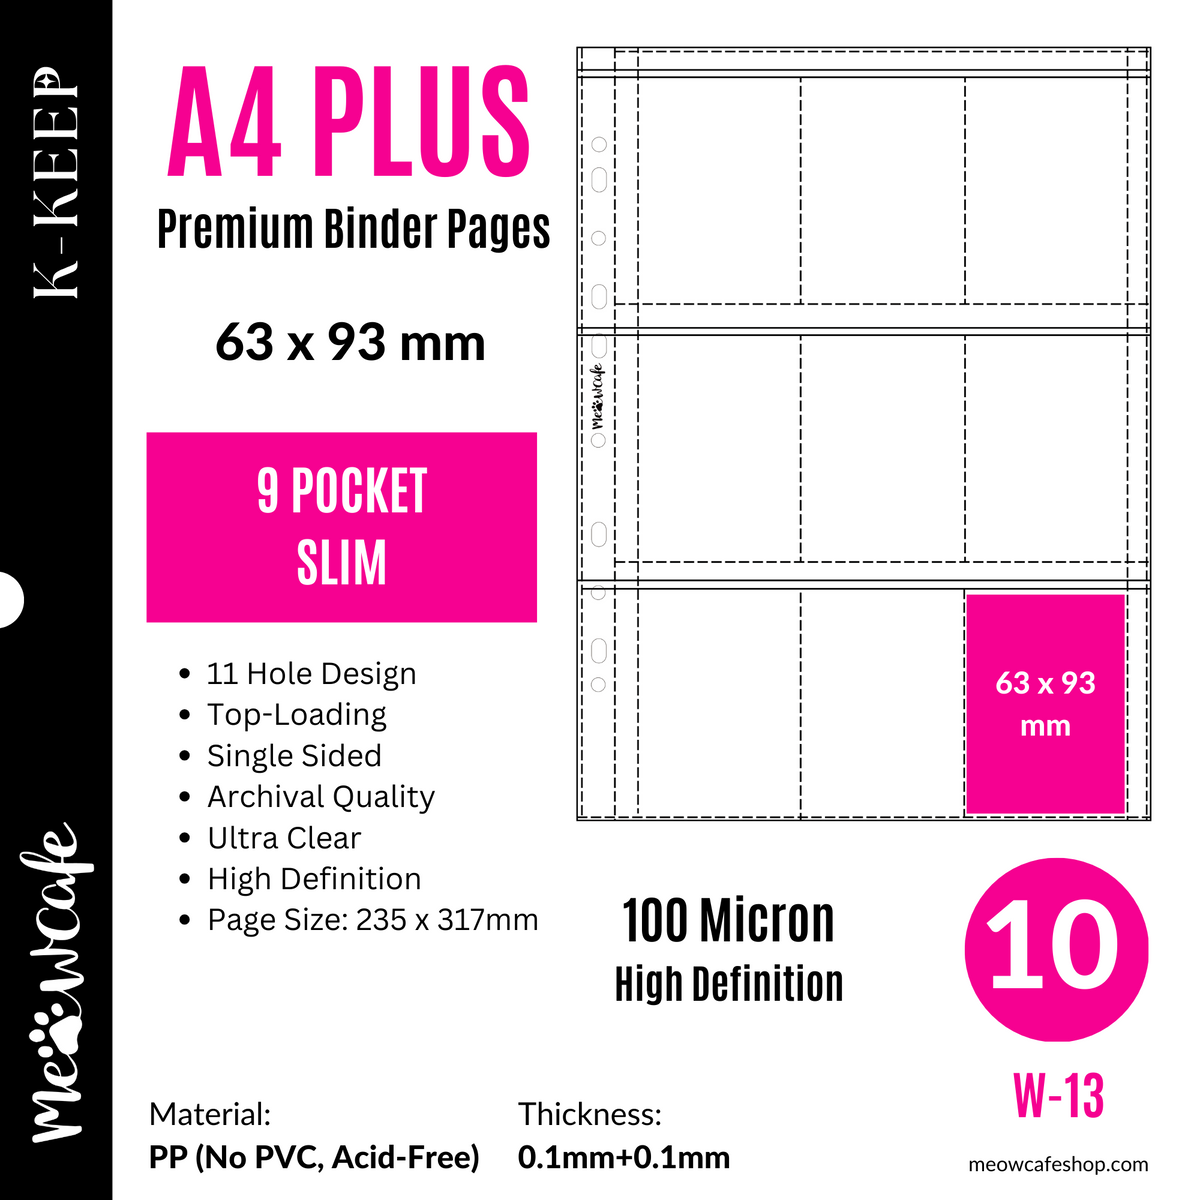 (Coming on March 20) K-KEEP [A4 PLUS] -  9 Pocket (Slim 63x93mm) - 11 Holes Premium Binder Pages, 100 Micron Thick, High Definition (Pack of 10) - (W-13)